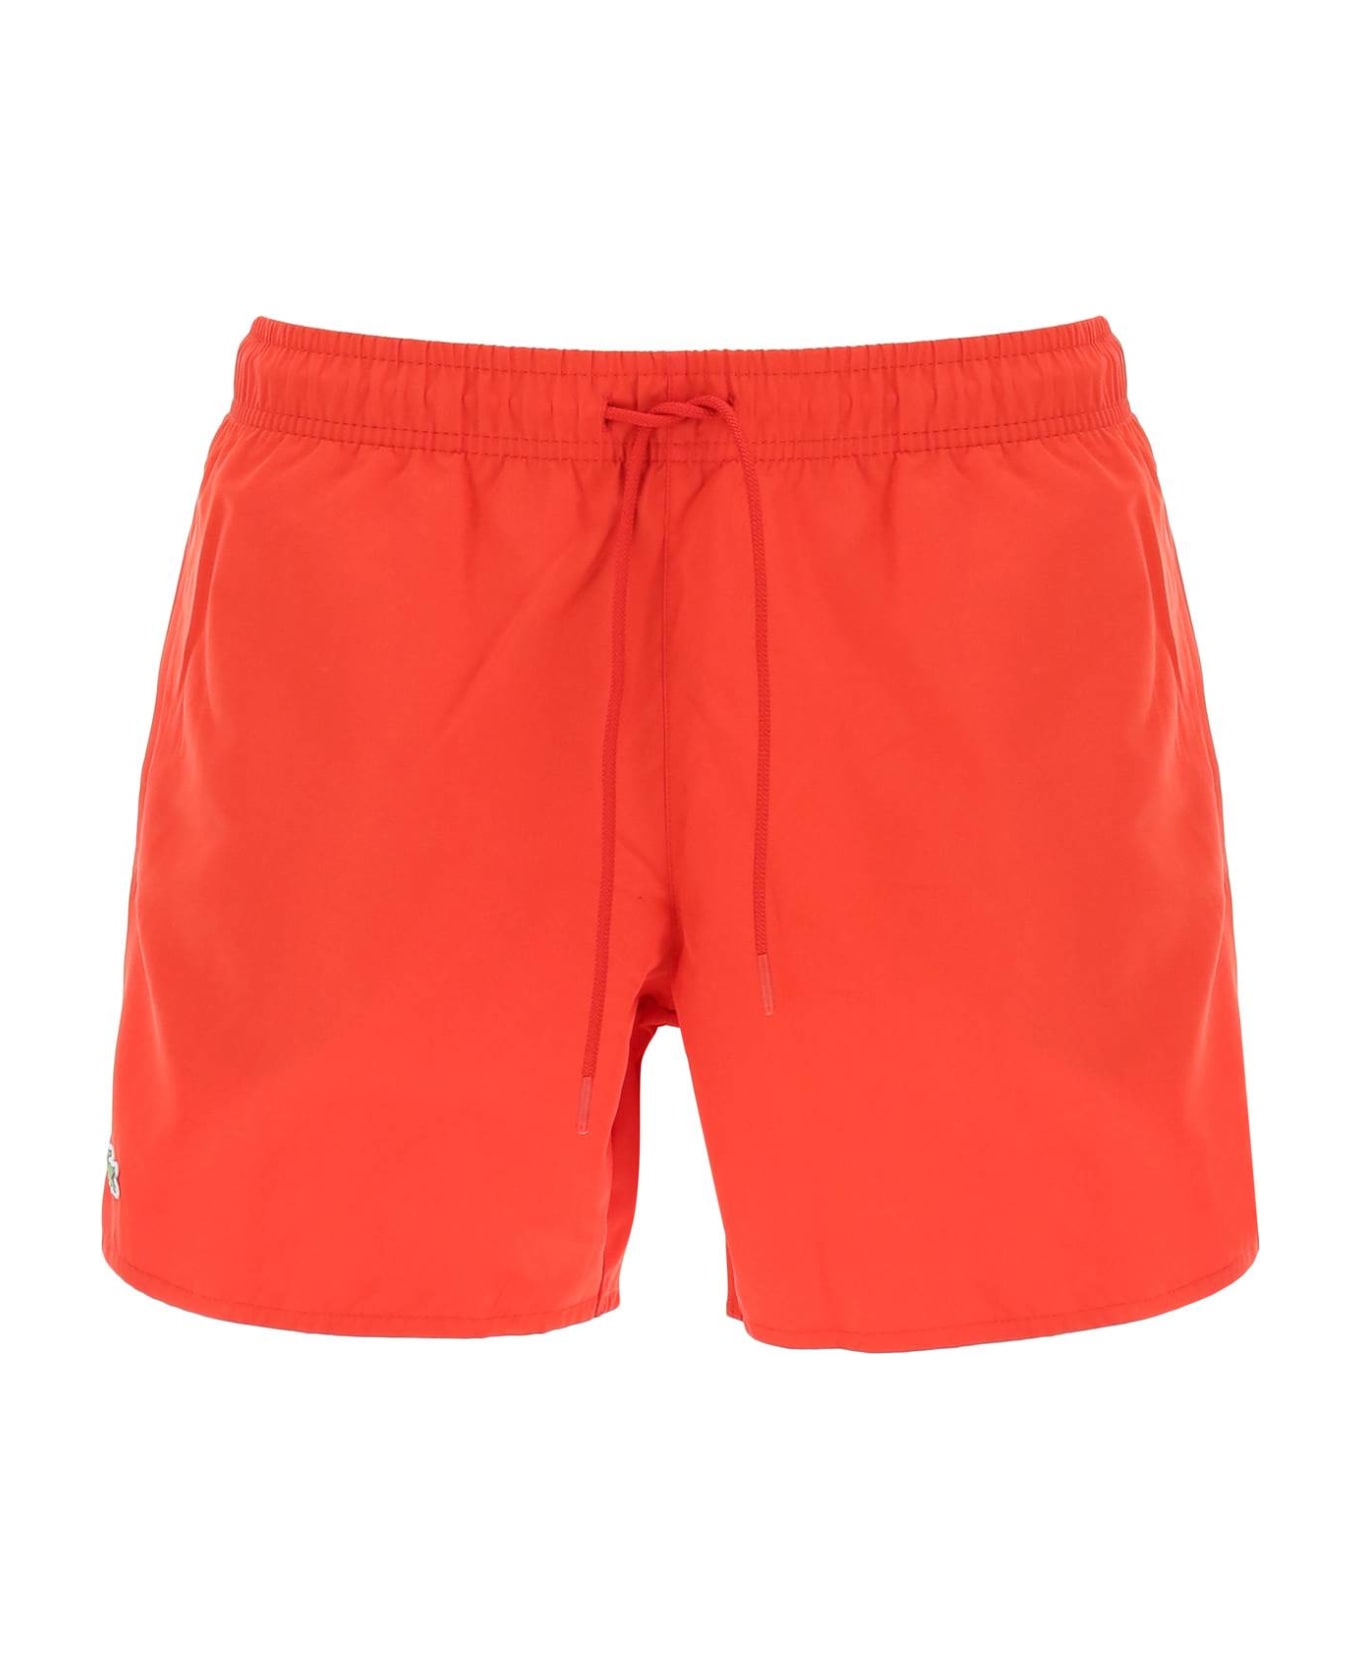 Lacoste Logo Patch Swim Shorts - RED GREEN (Red)